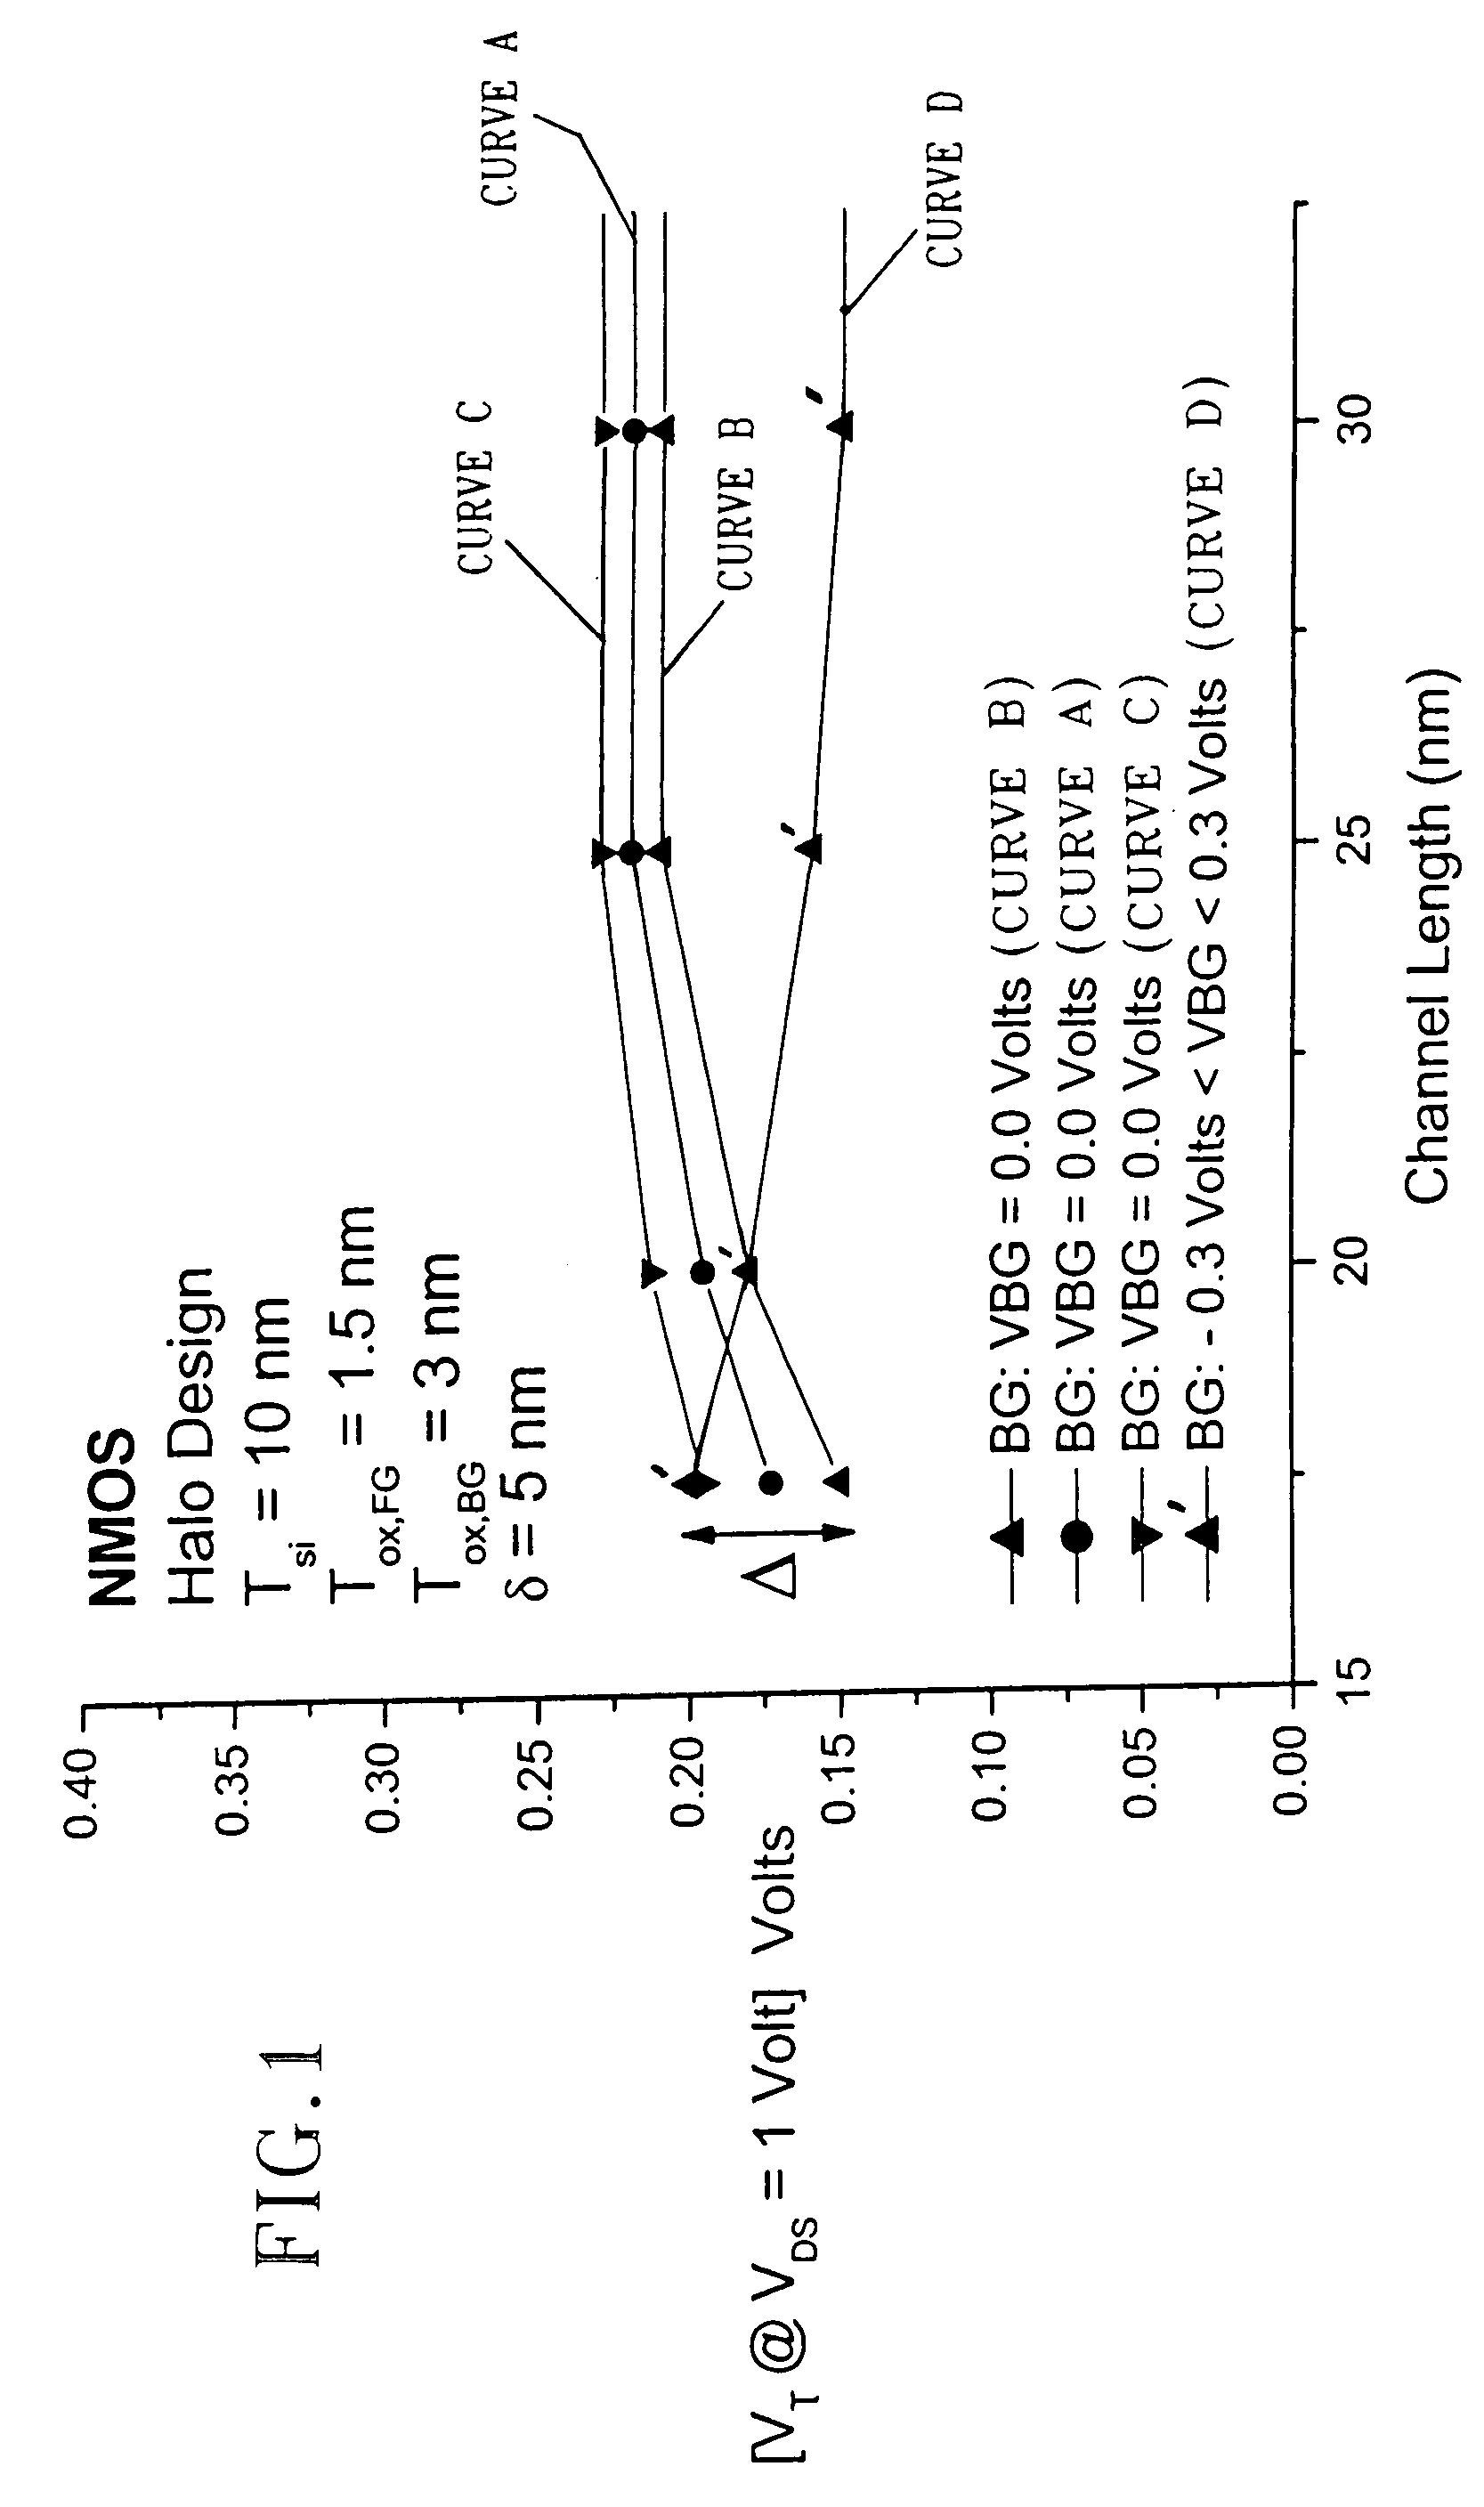 Threshold voltage roll-off compensation using back-gated MOSFET devices for system high-performance and low standby power